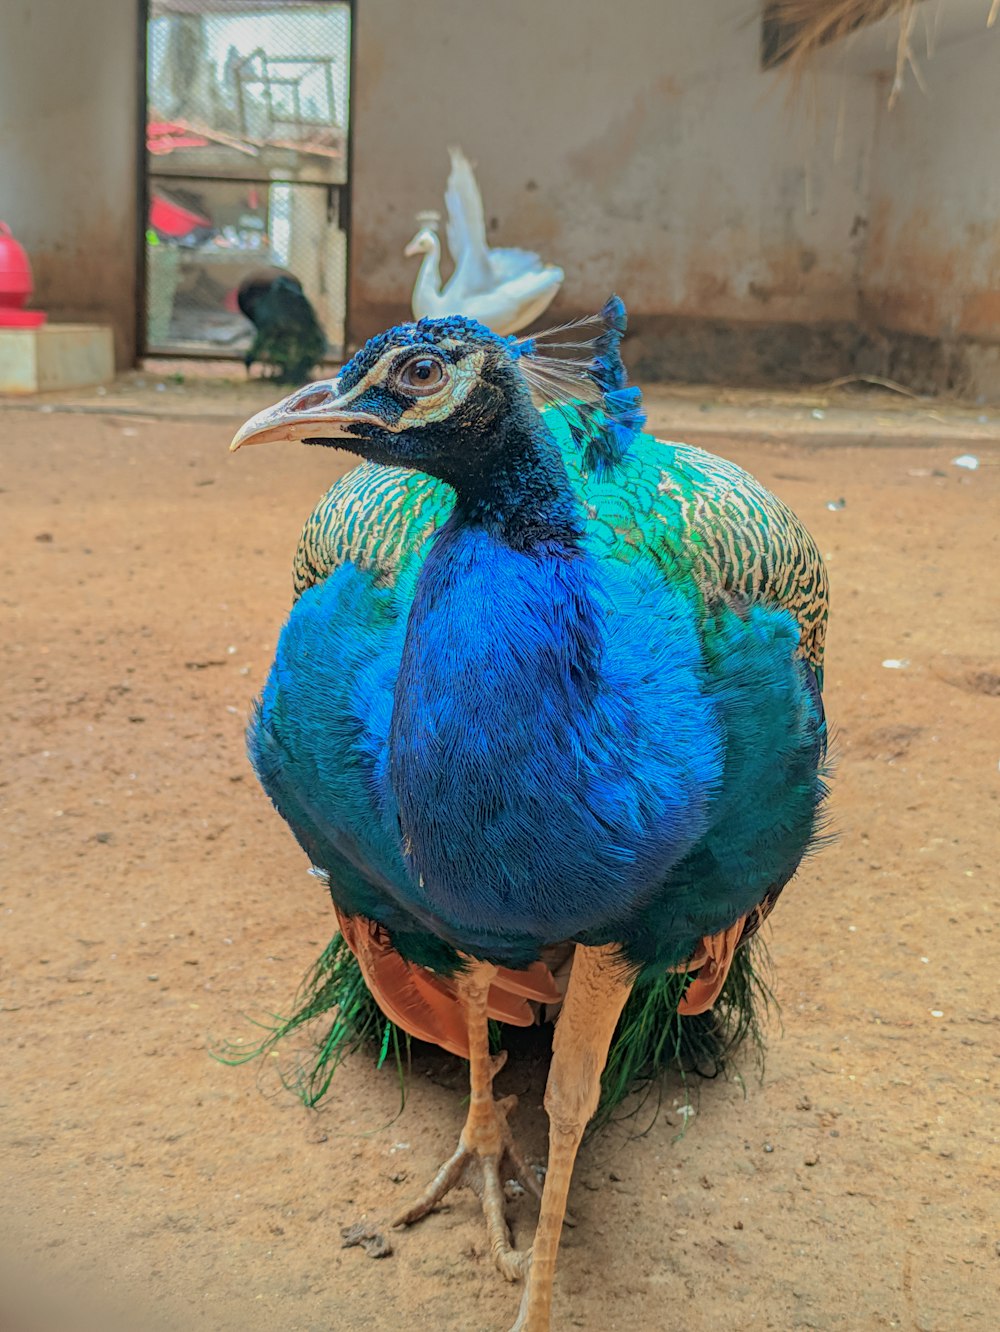 a blue and green bird sitting on the ground